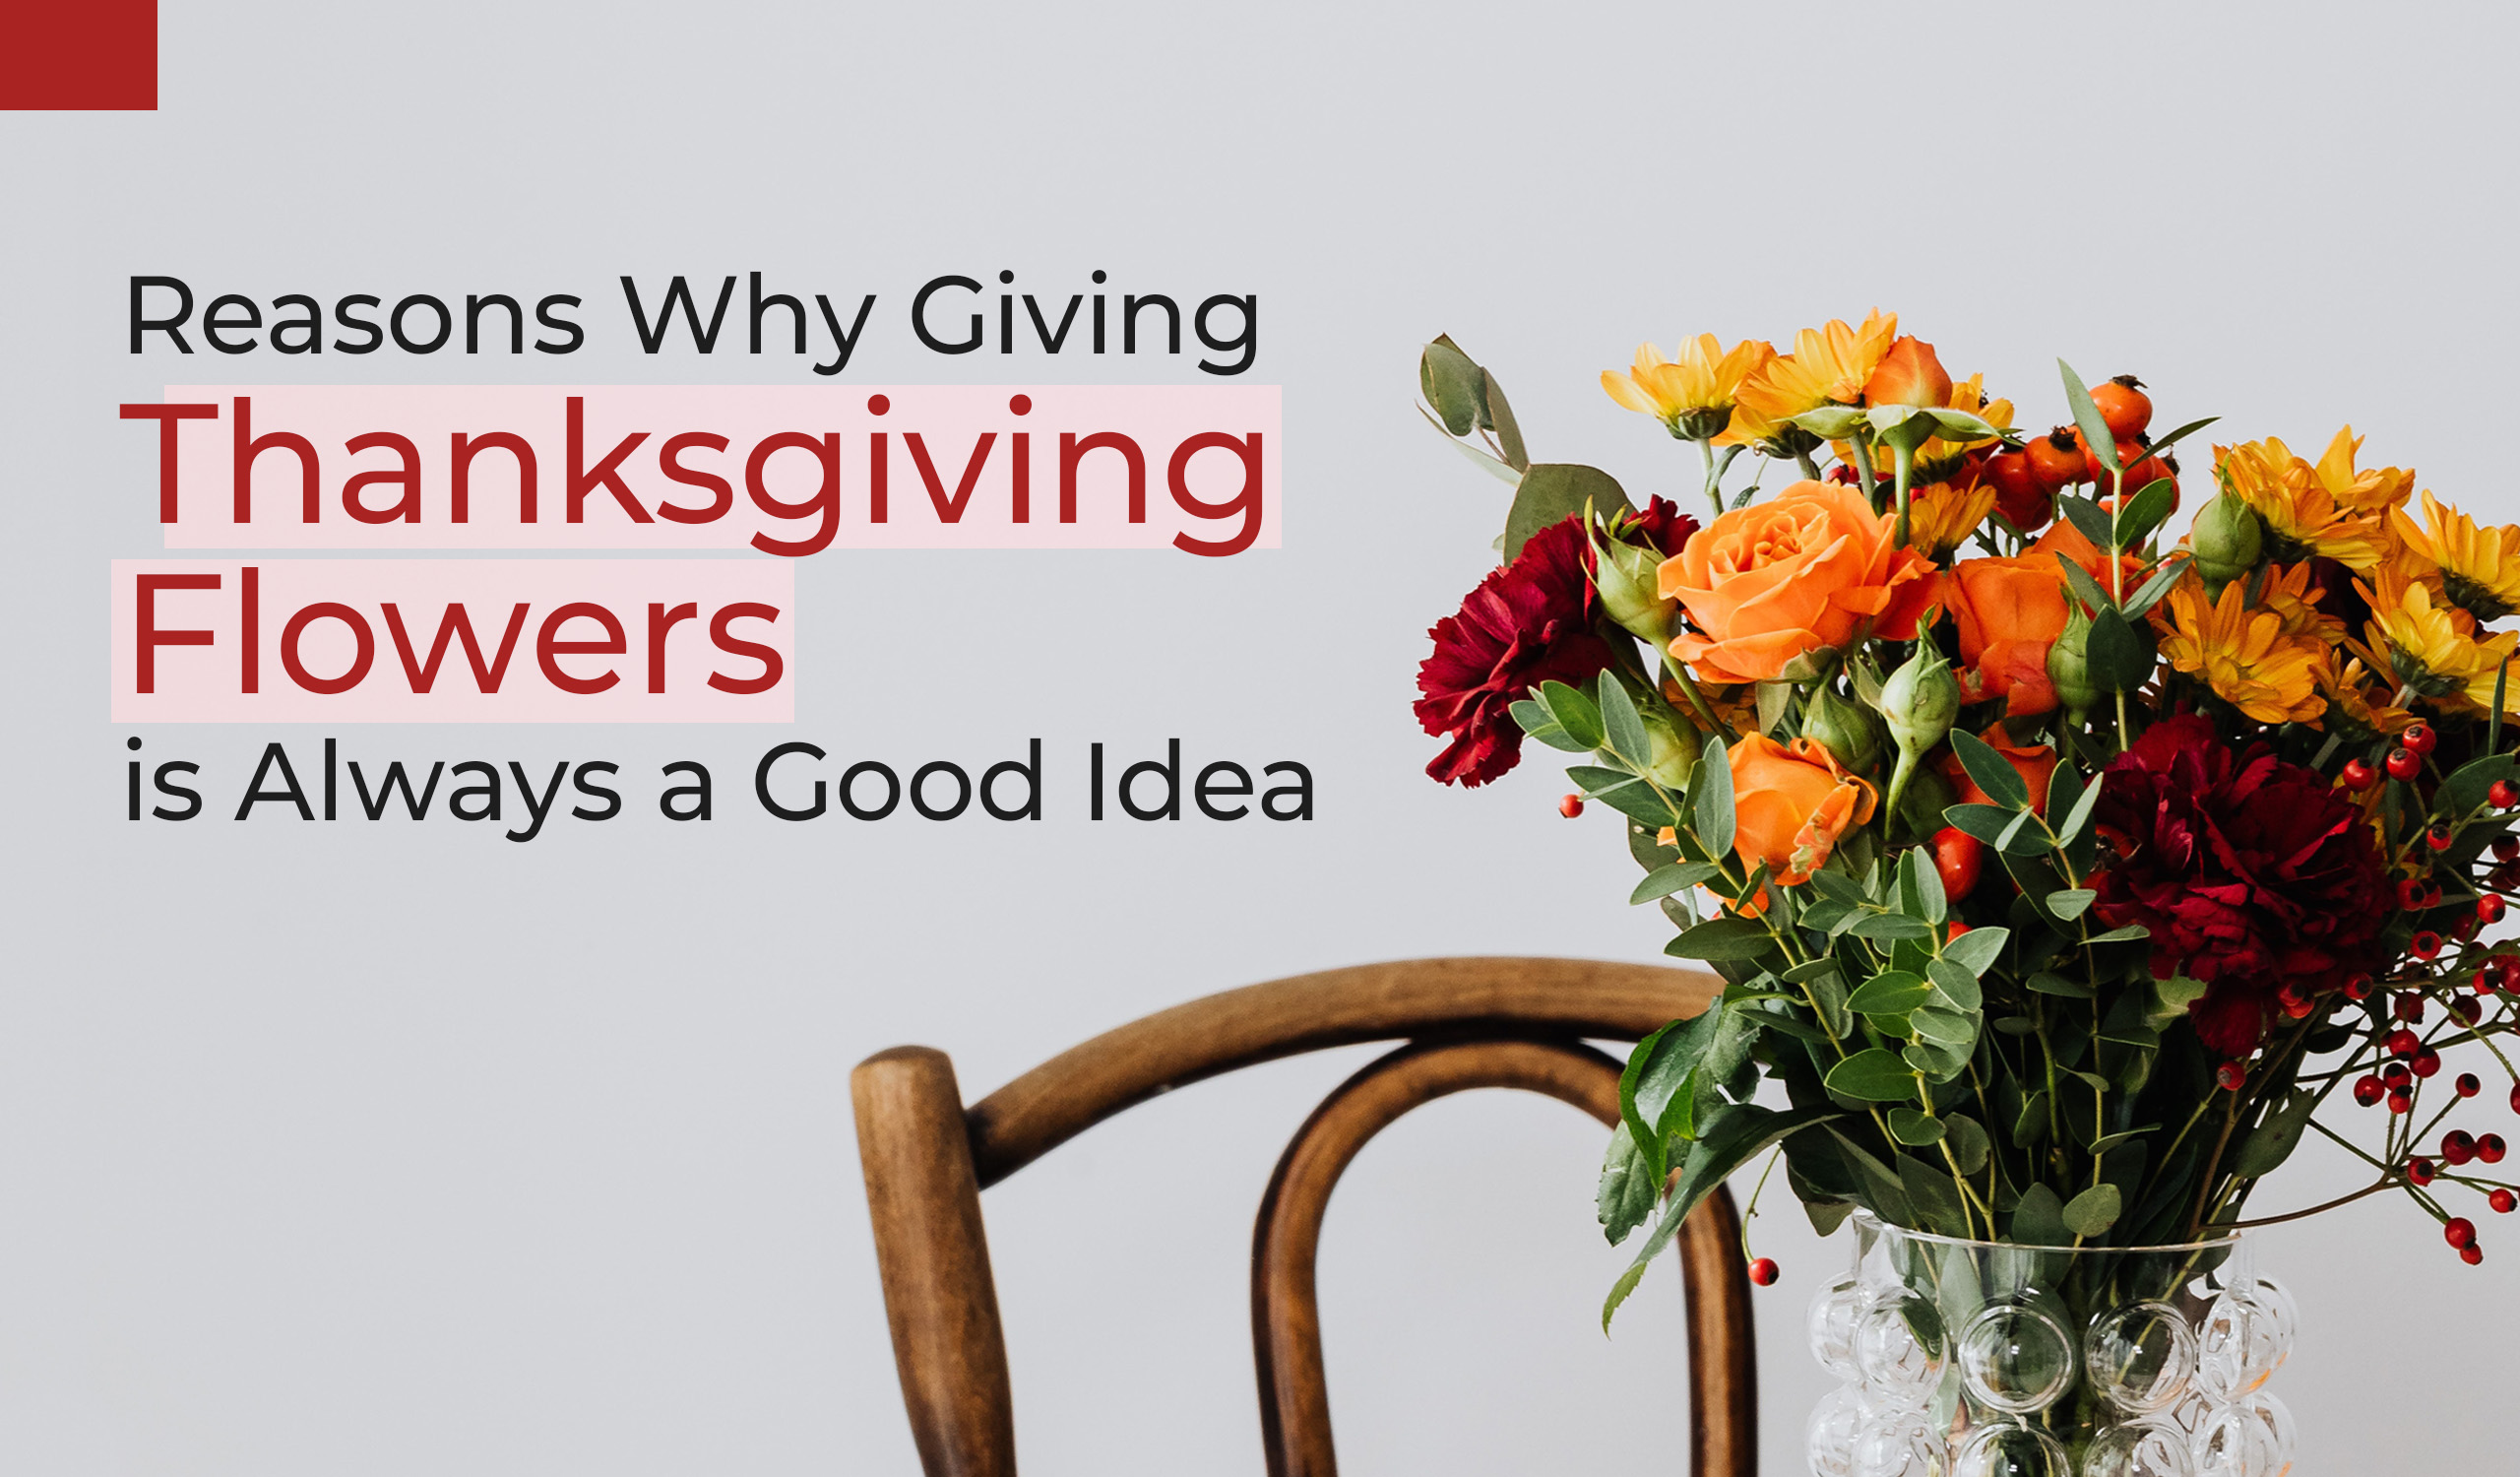 Reasons Why Giving Thanksgiving Flowers is Always a Good Idea